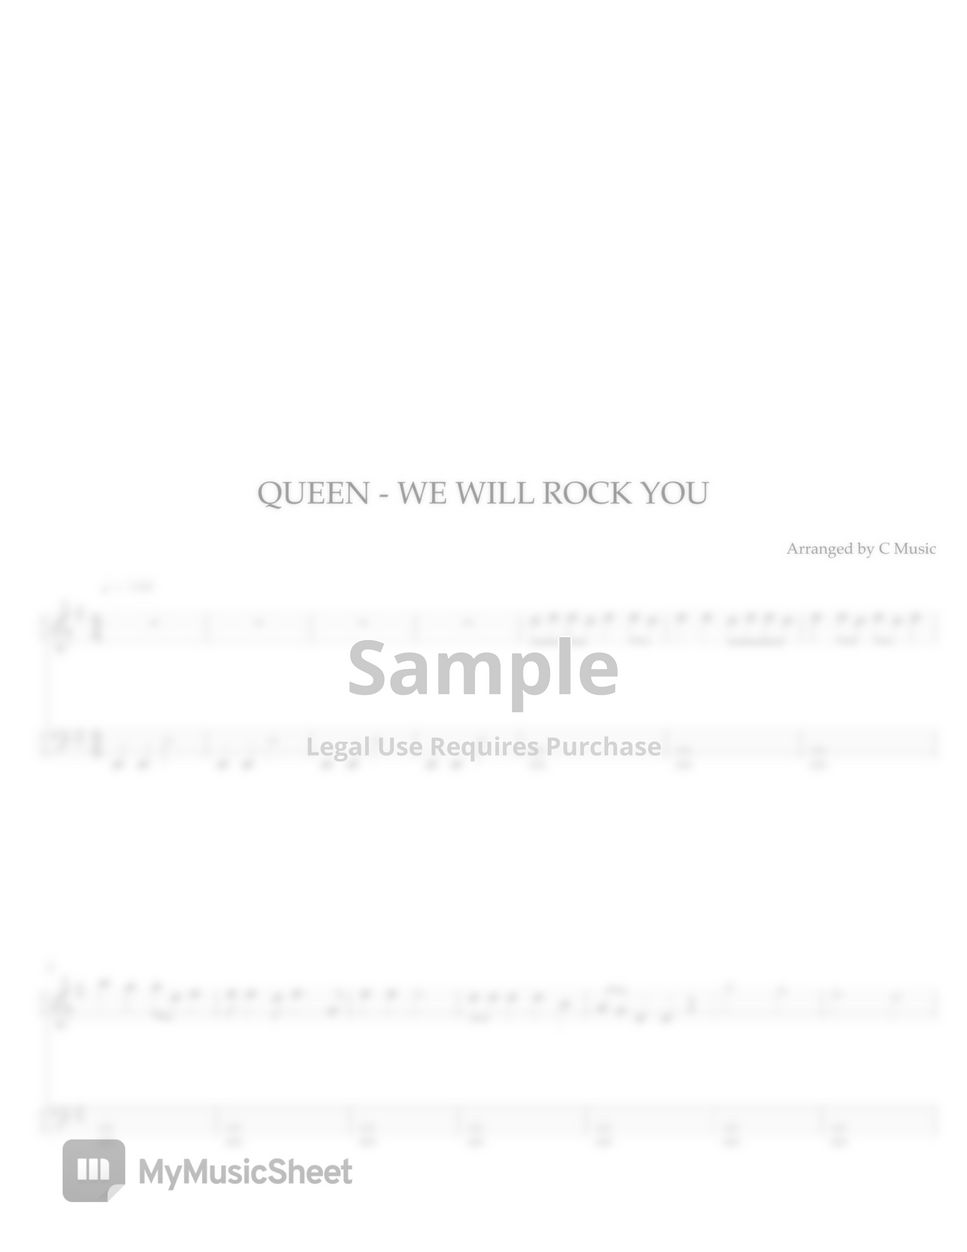 Queen - We Will Rock You (Easy Version) by C Music